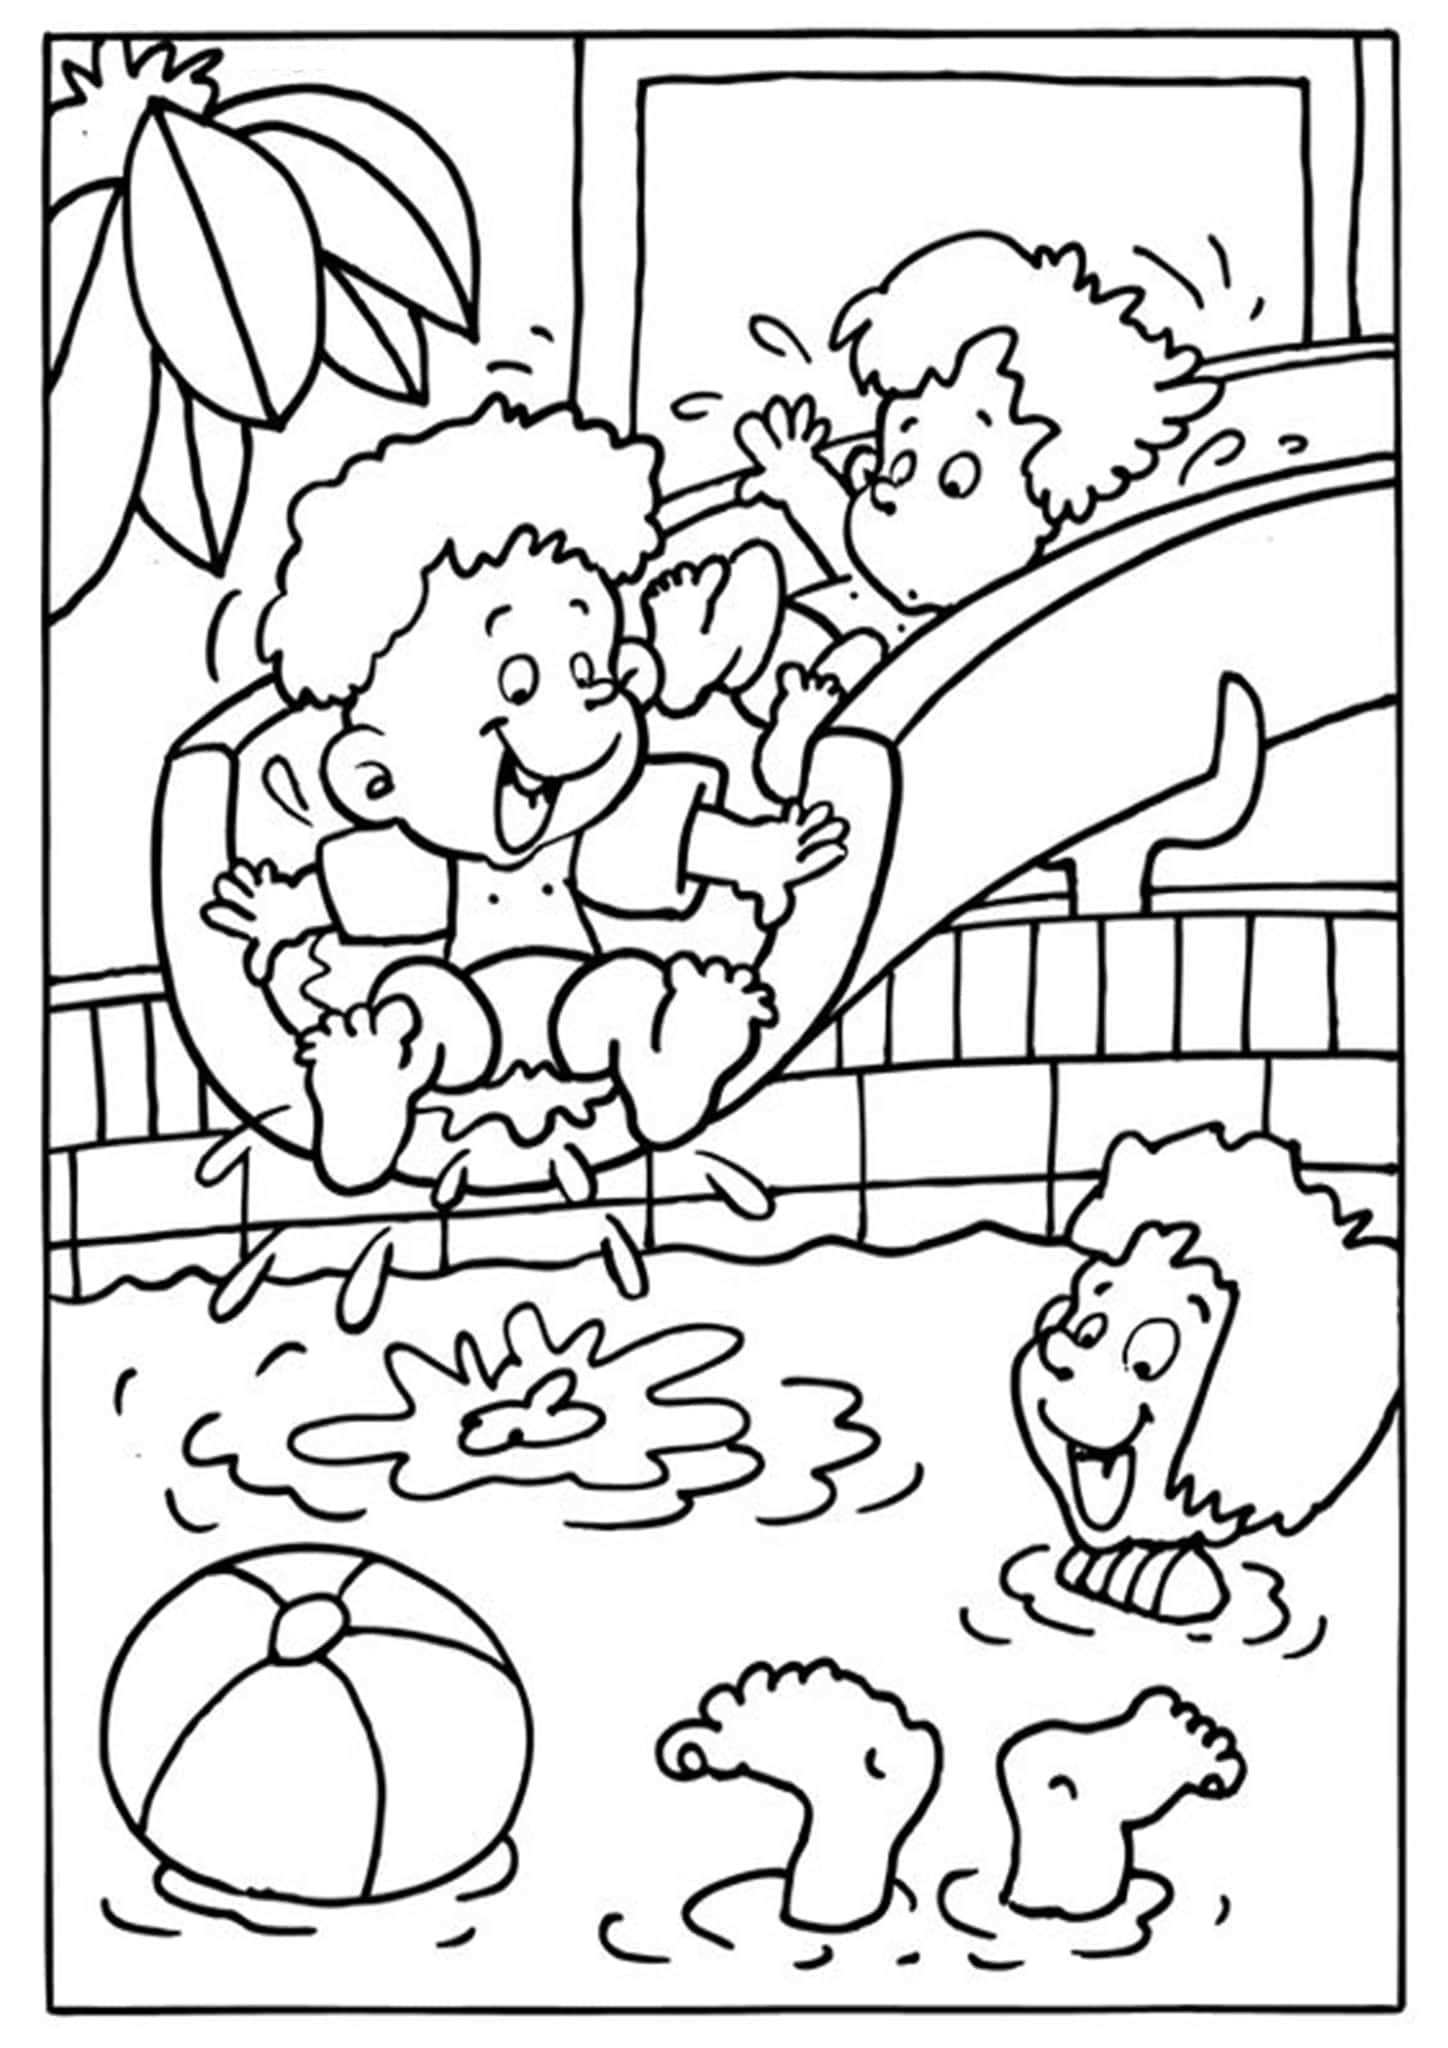 Free Easy To Print Summer Coloring Pages Summer Coloring Pages Coloring Pages Colorin